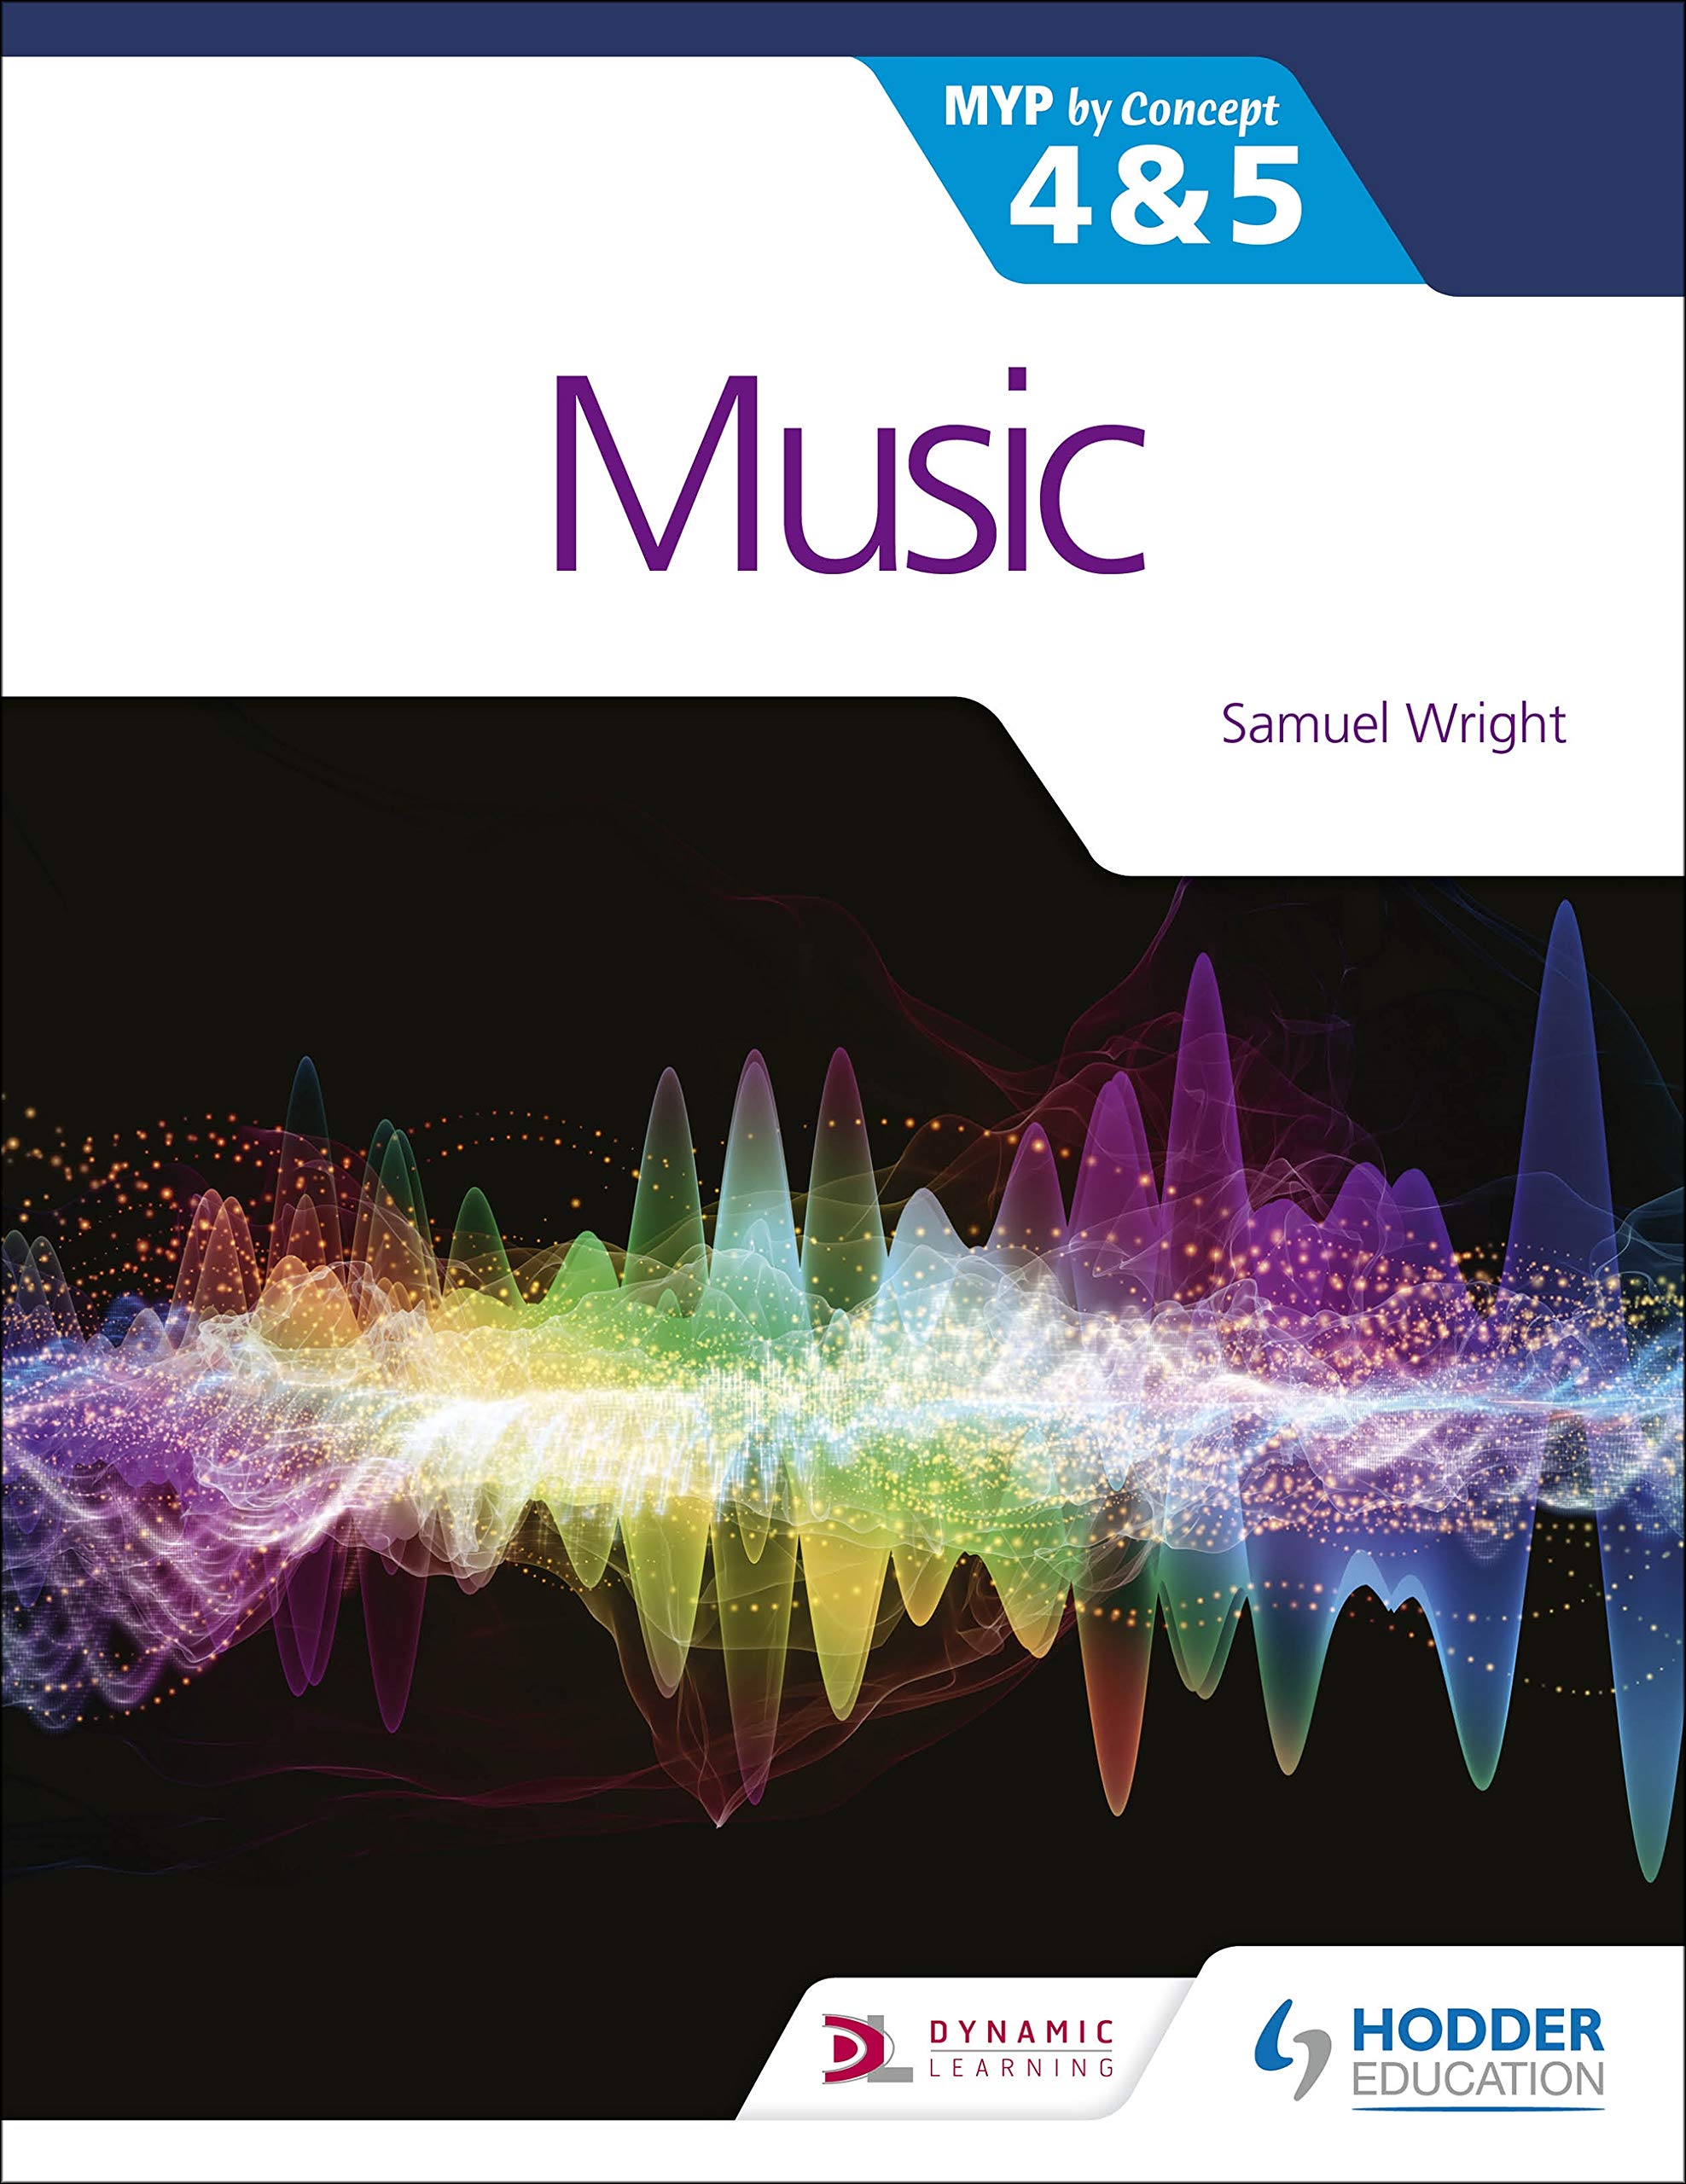 Hodder Music for the IB MYP 4&5: MYP by Concept By Samuel Wright